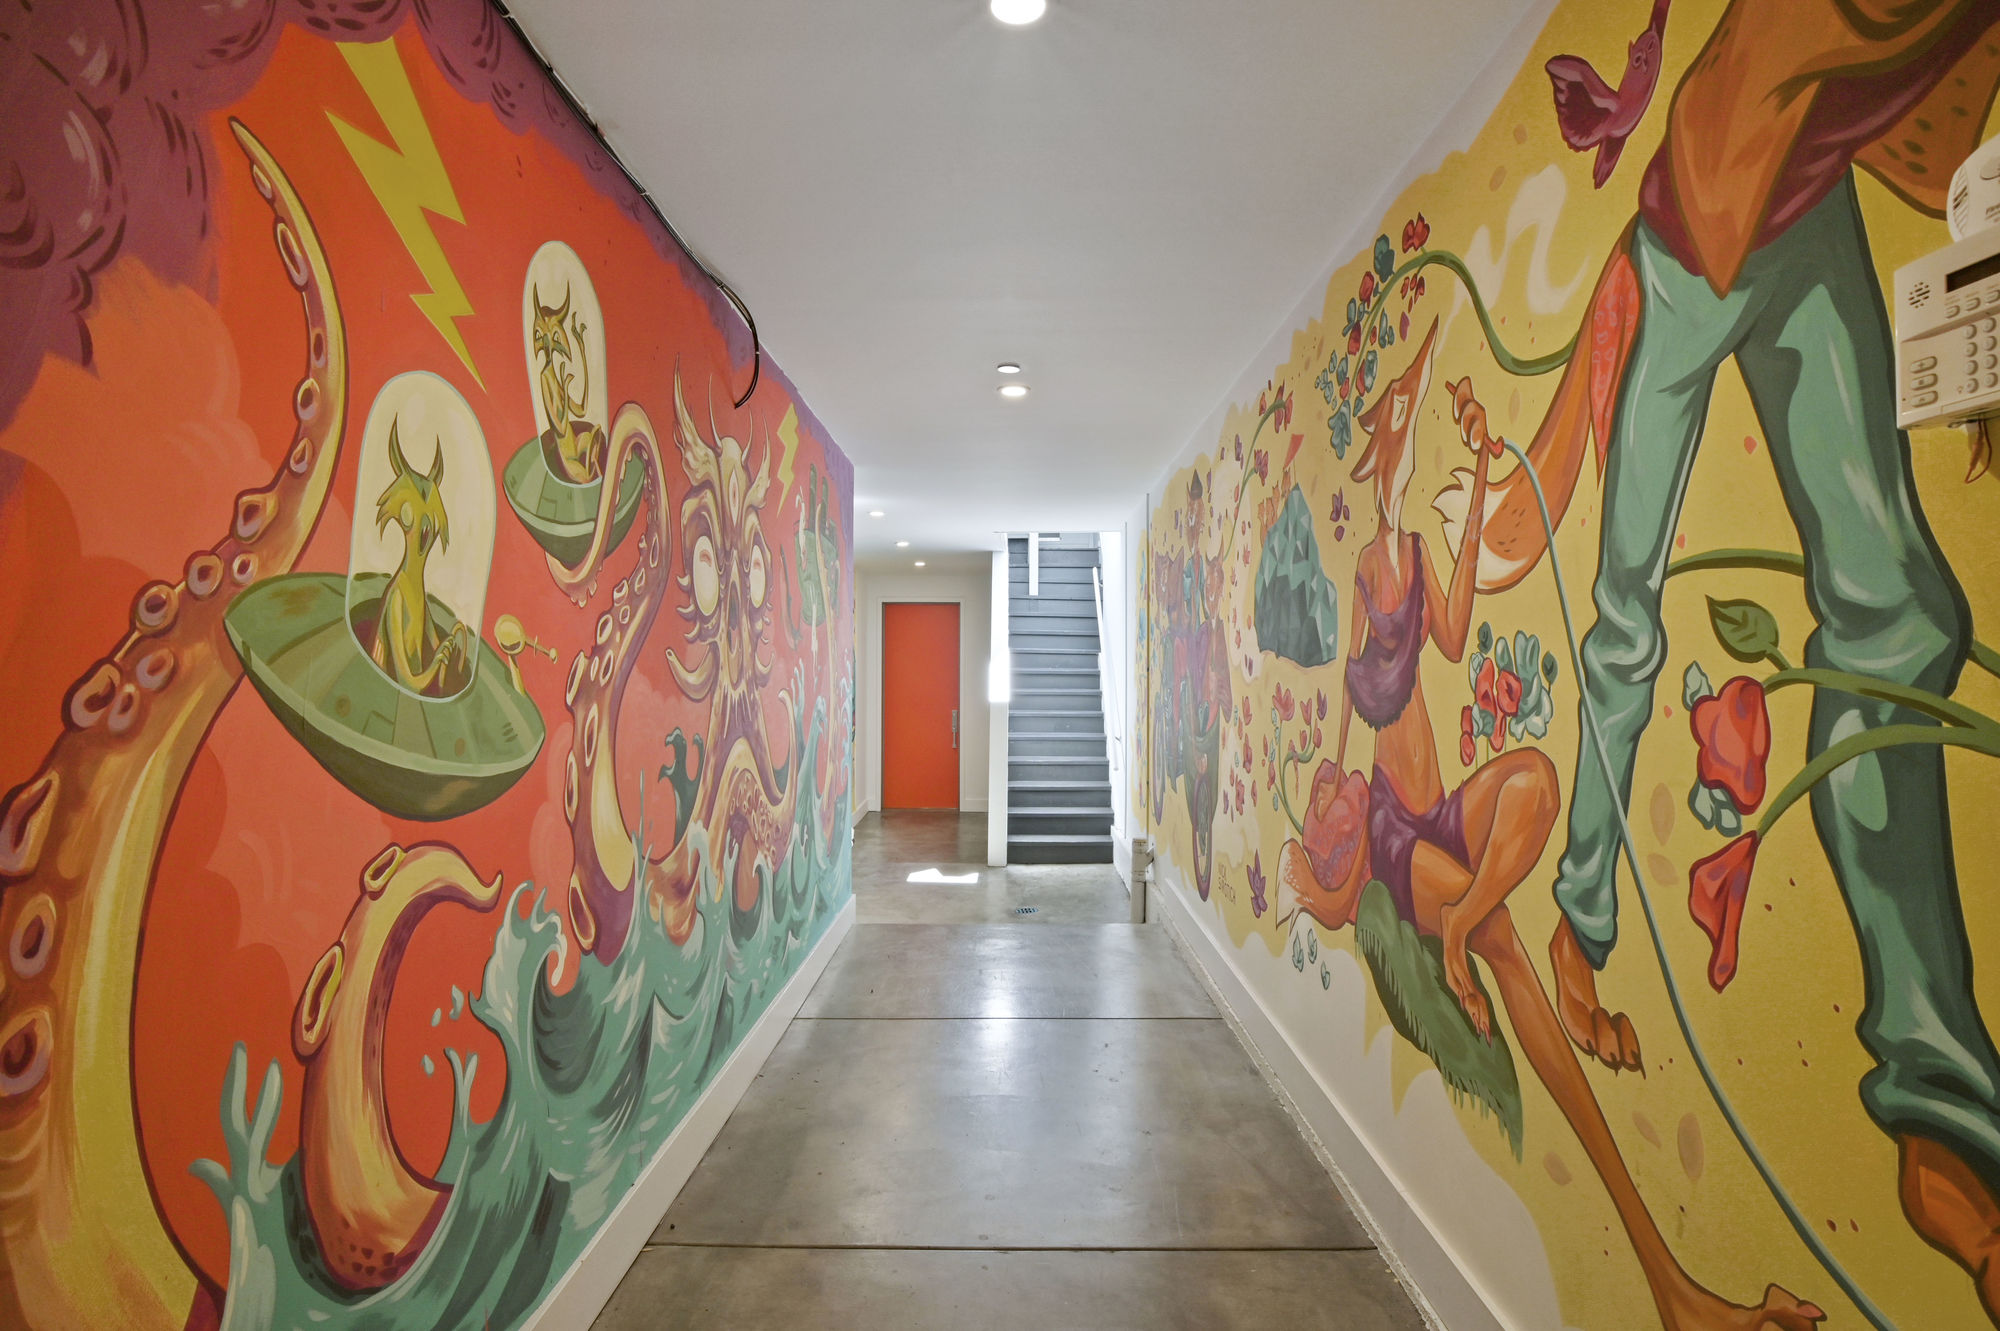 Property Photo: View of the hall leading to 45-49 Belcher Street, featuring walls with colorful painted art-work